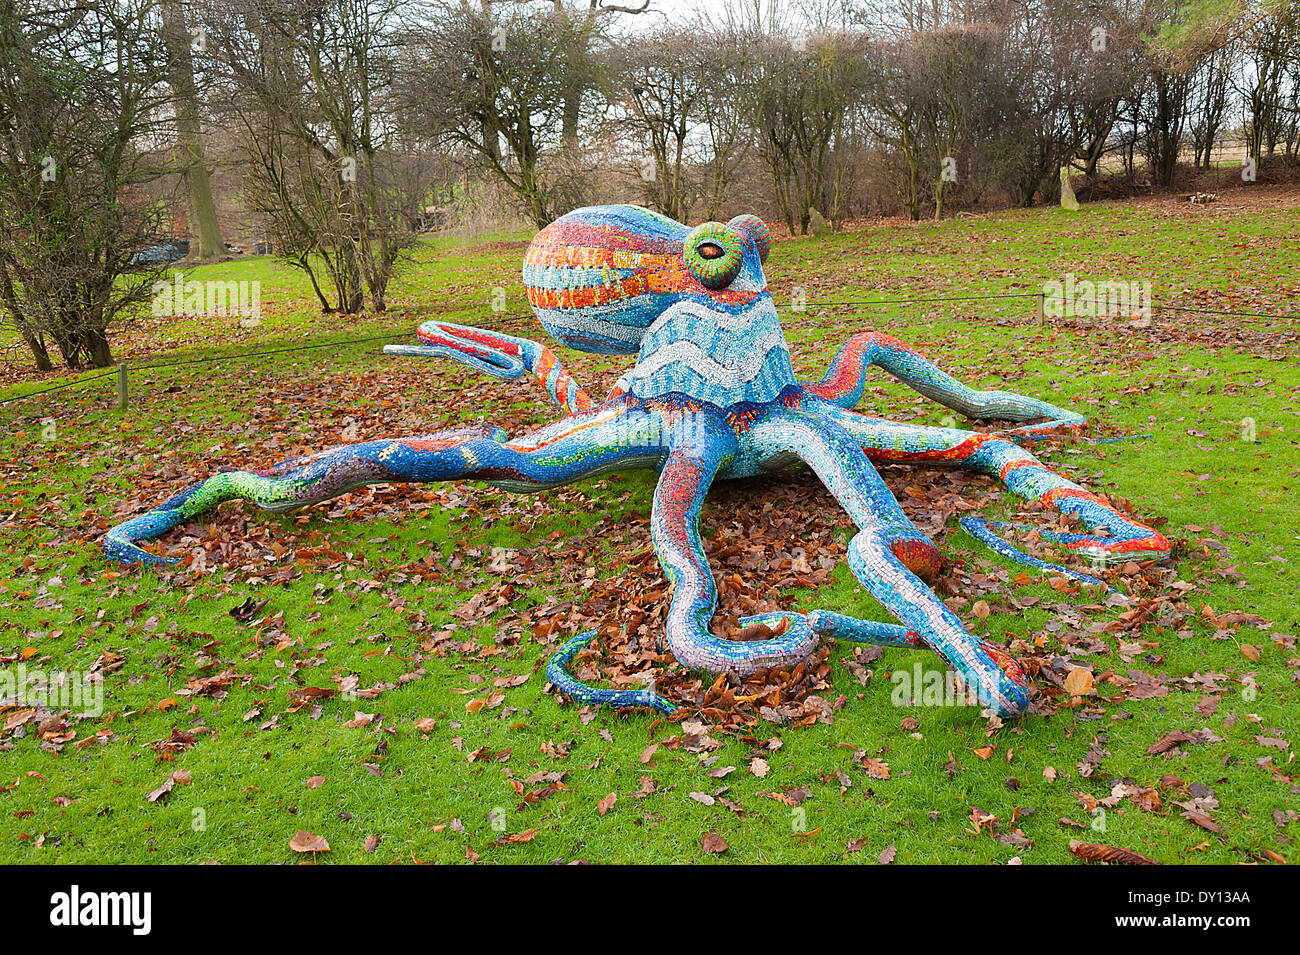 The Brightly Coloured Mosaic Octopus Sculpture at The Yorkshire Sculpture Park West Bretton Wakefield England United Kingdom UK Stock Photo